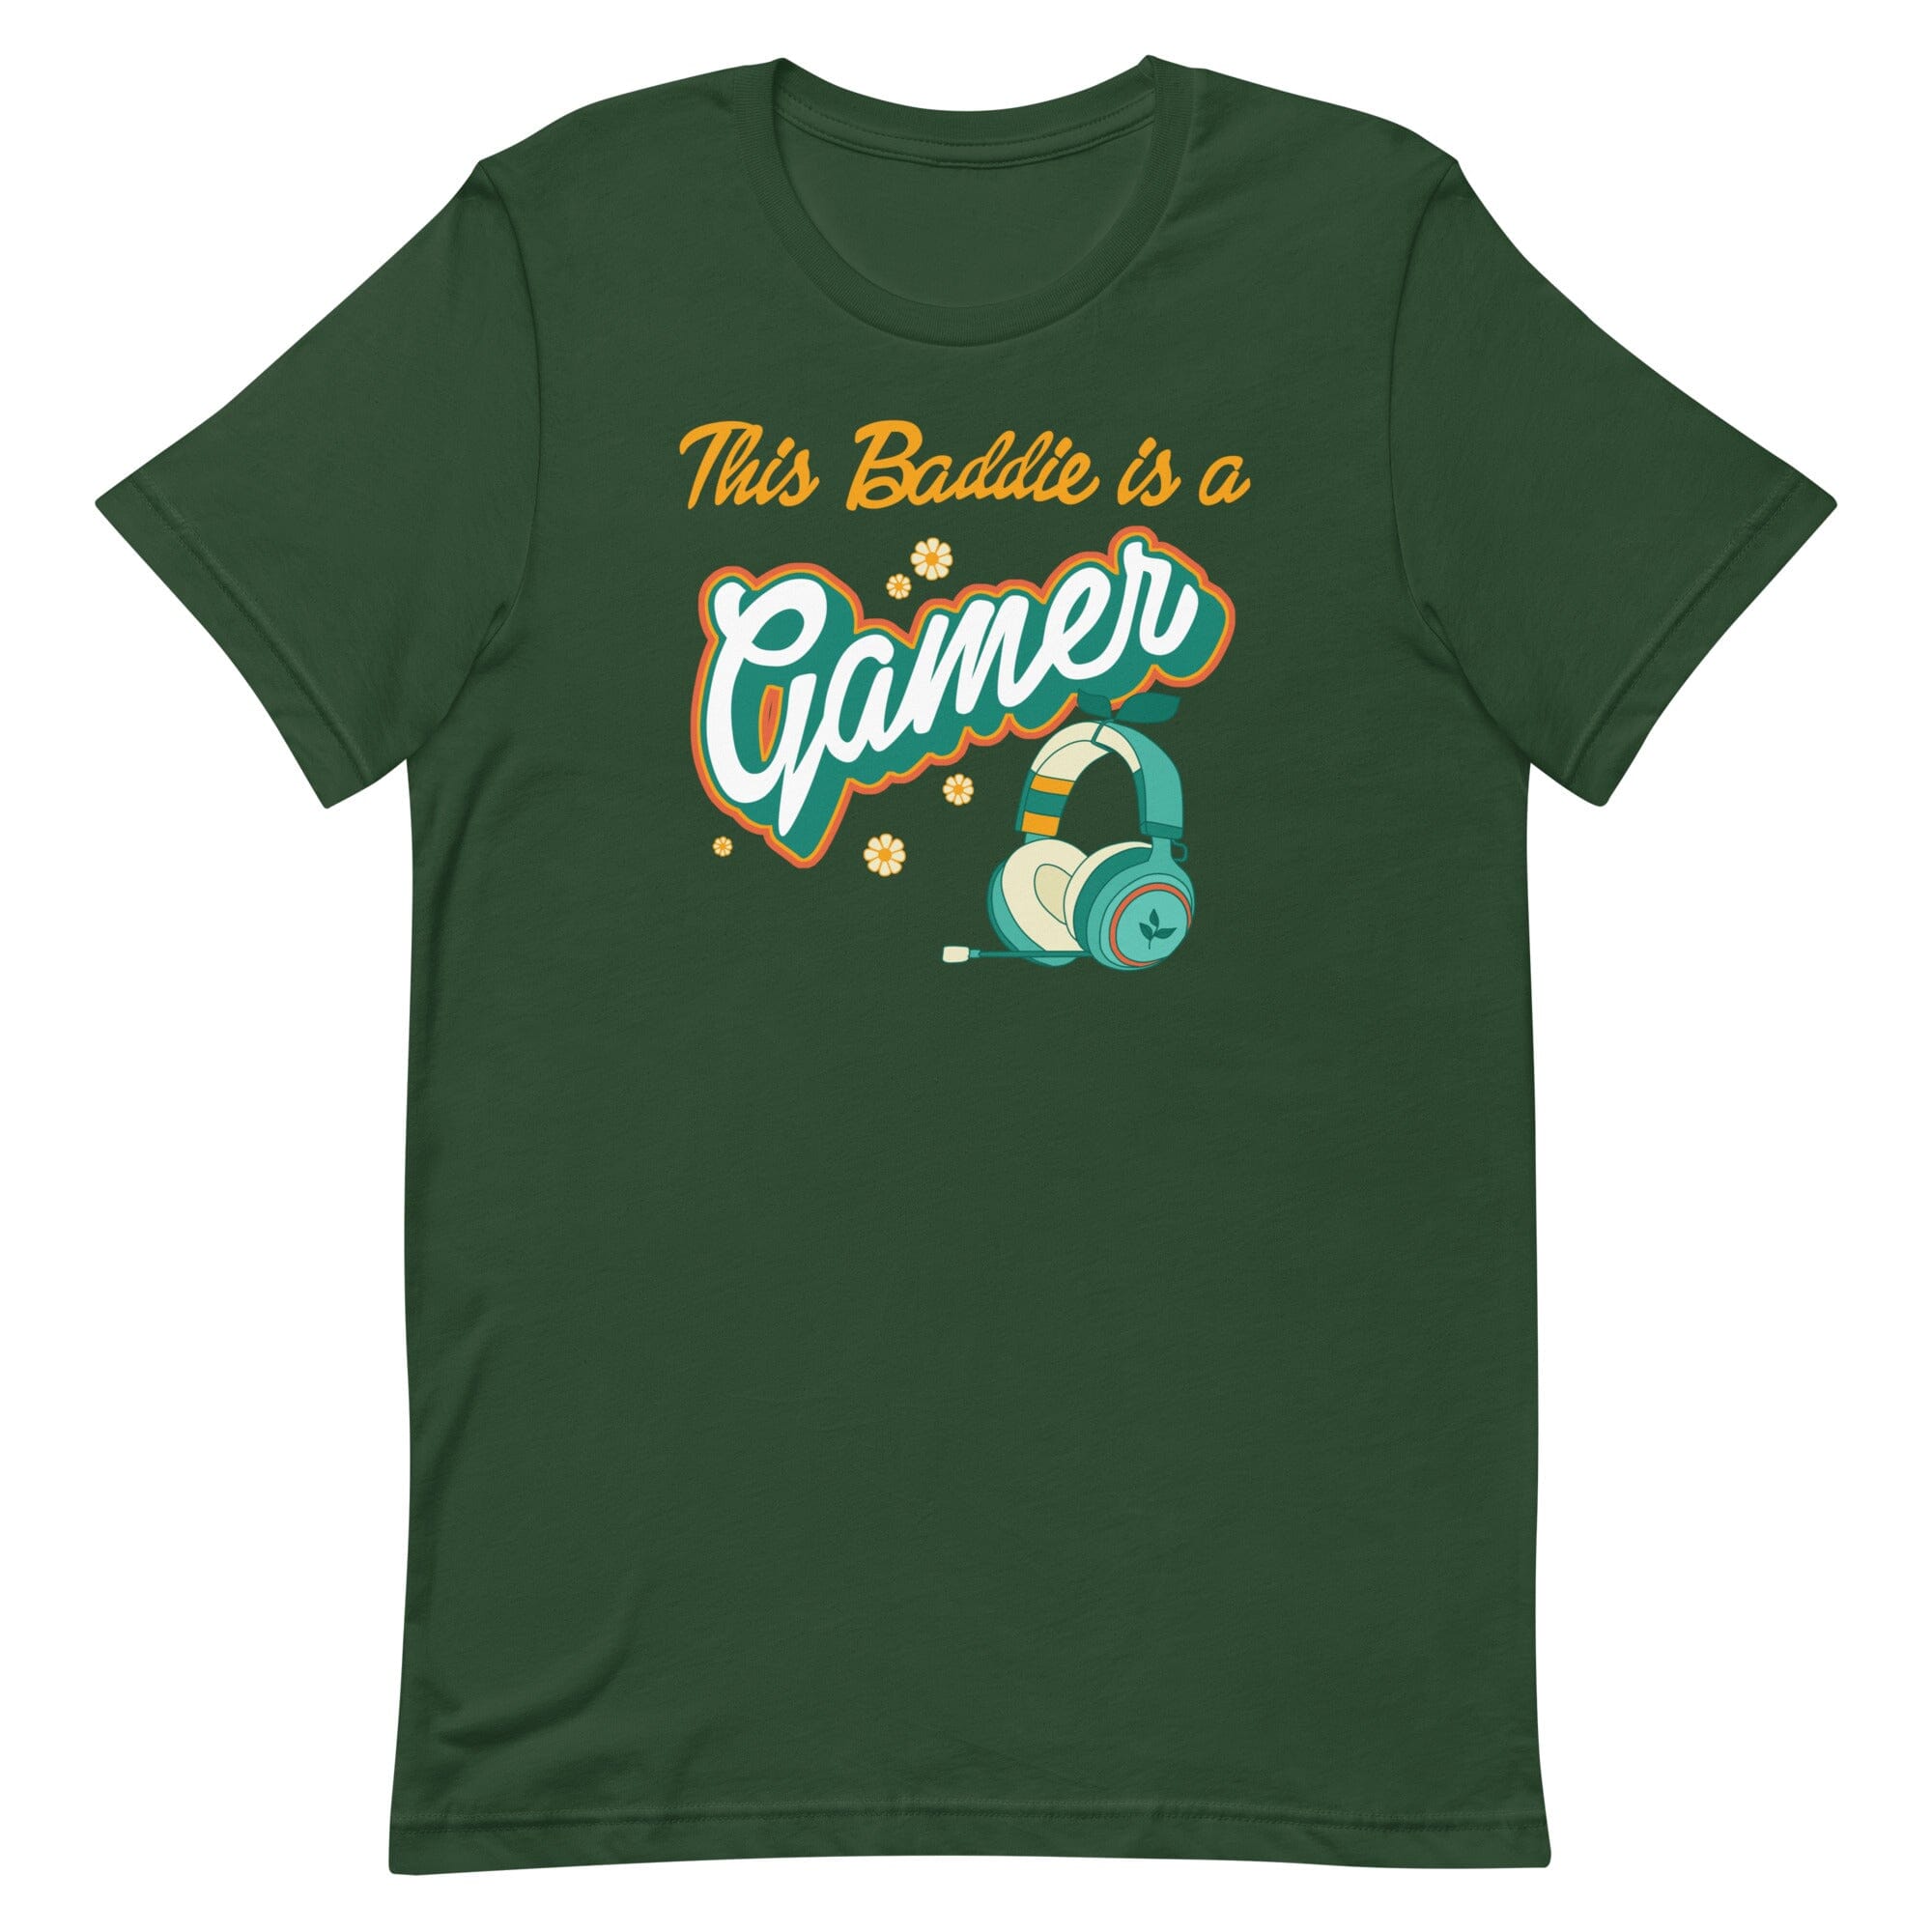 This Baddie is a Gamer | Unisex t-shirt | Feminist Gamer Threads & Thistles Inventory Forest (Retro Cottagecore) S 